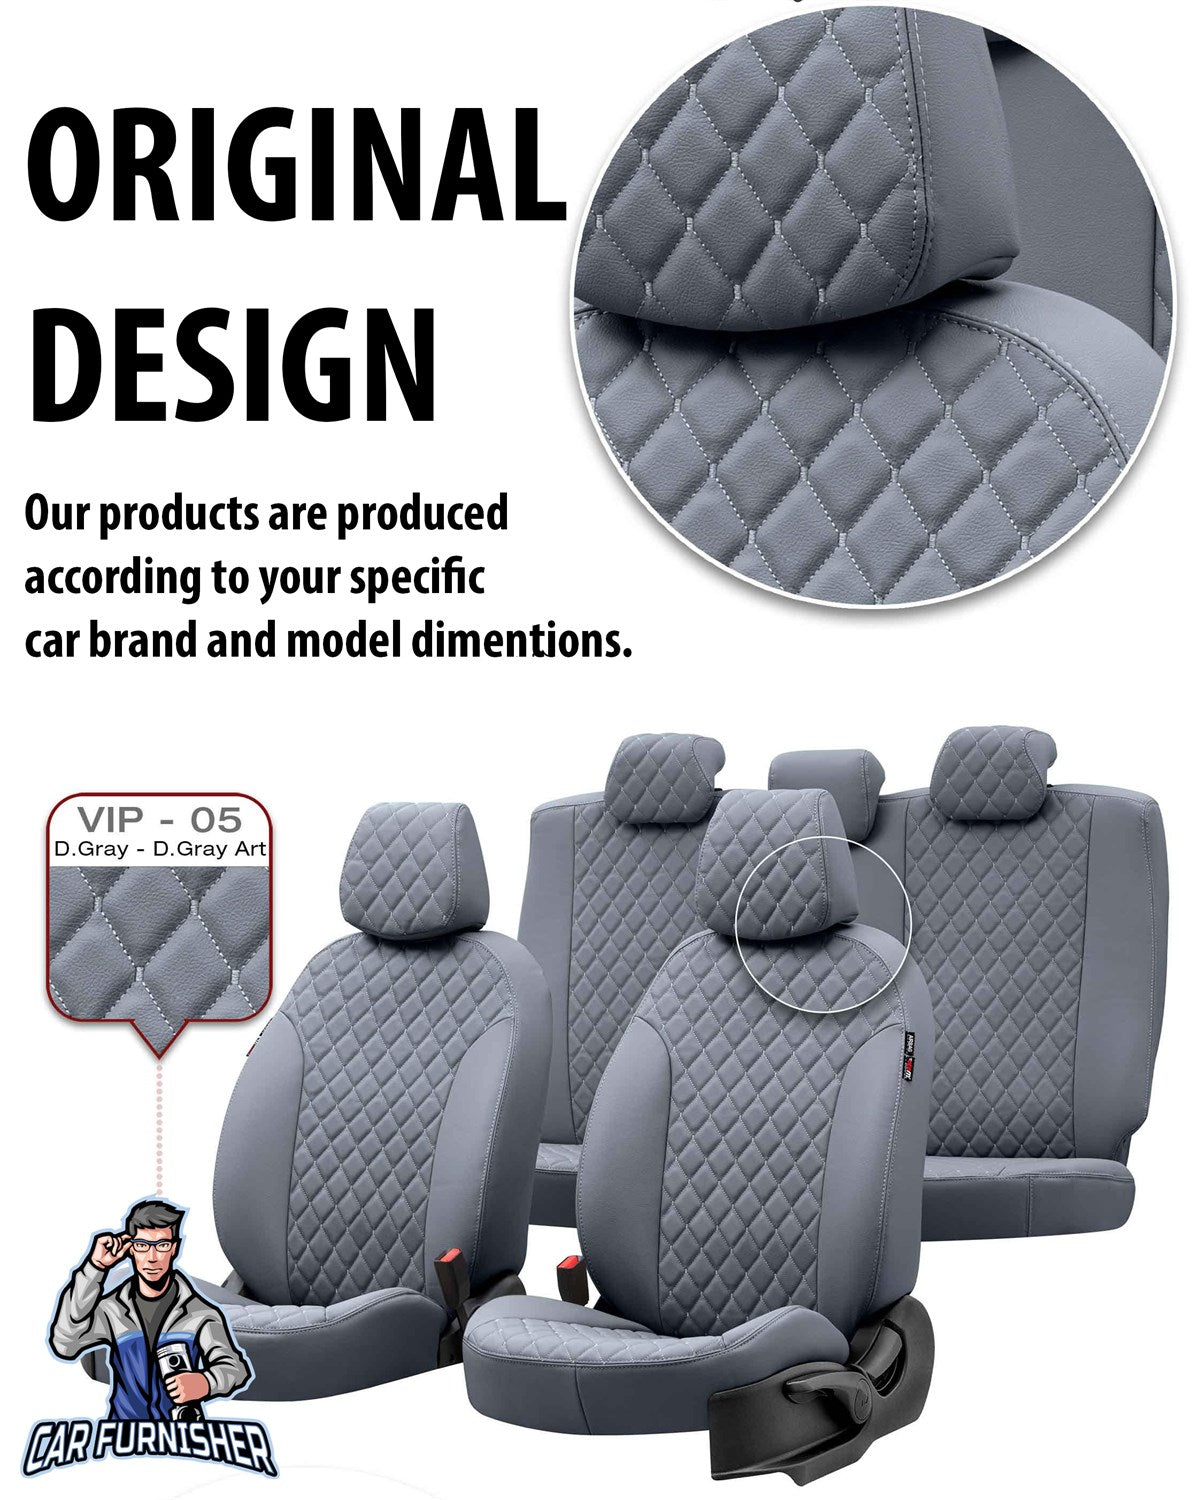 Nissan Pathfinder Seat Cover Madrid Leather Design Beige Leather